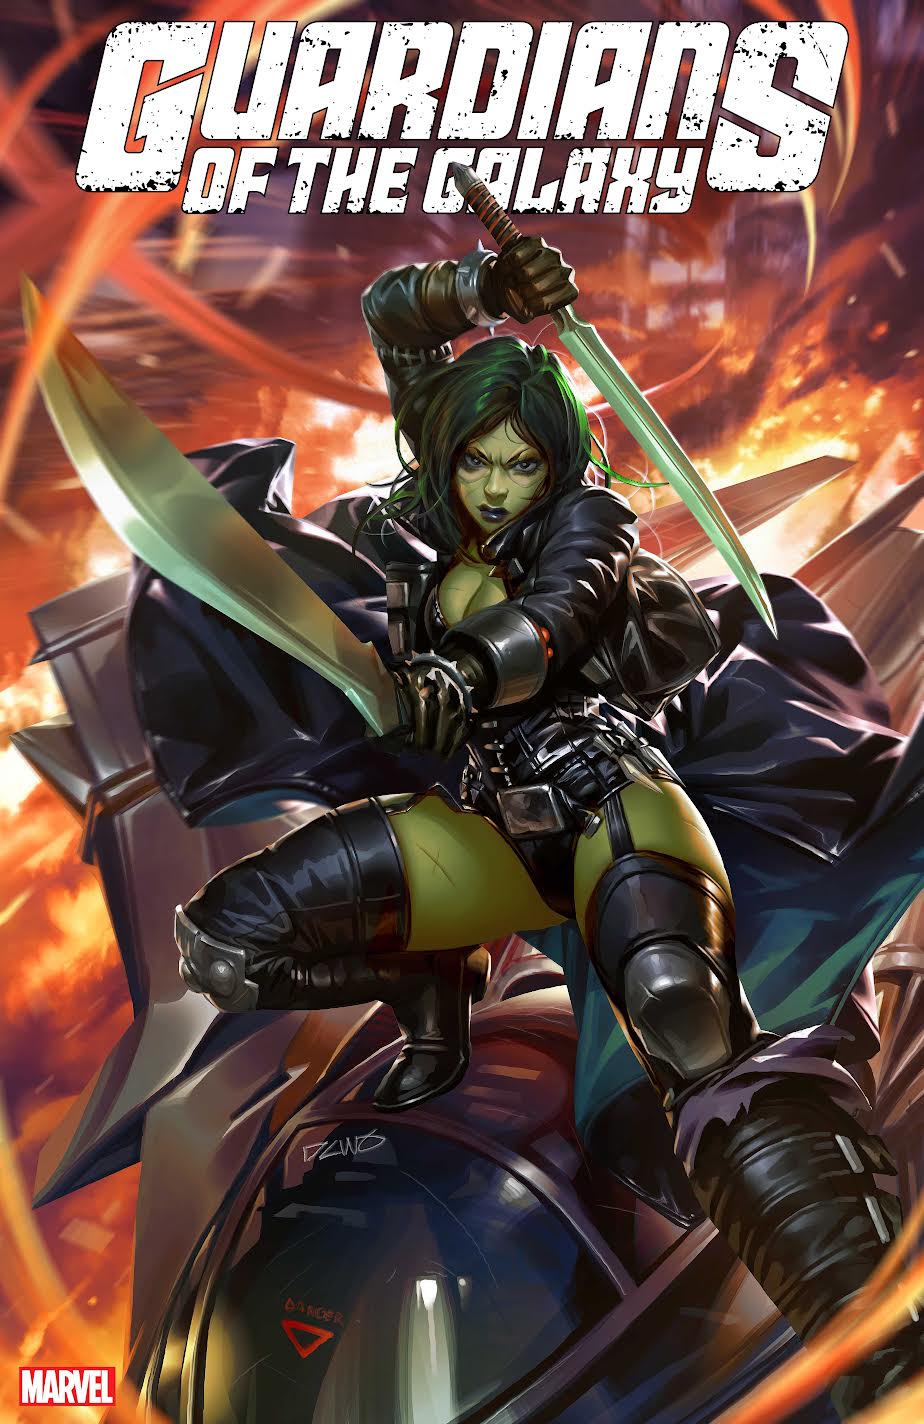 The character Gamora on the cover of 